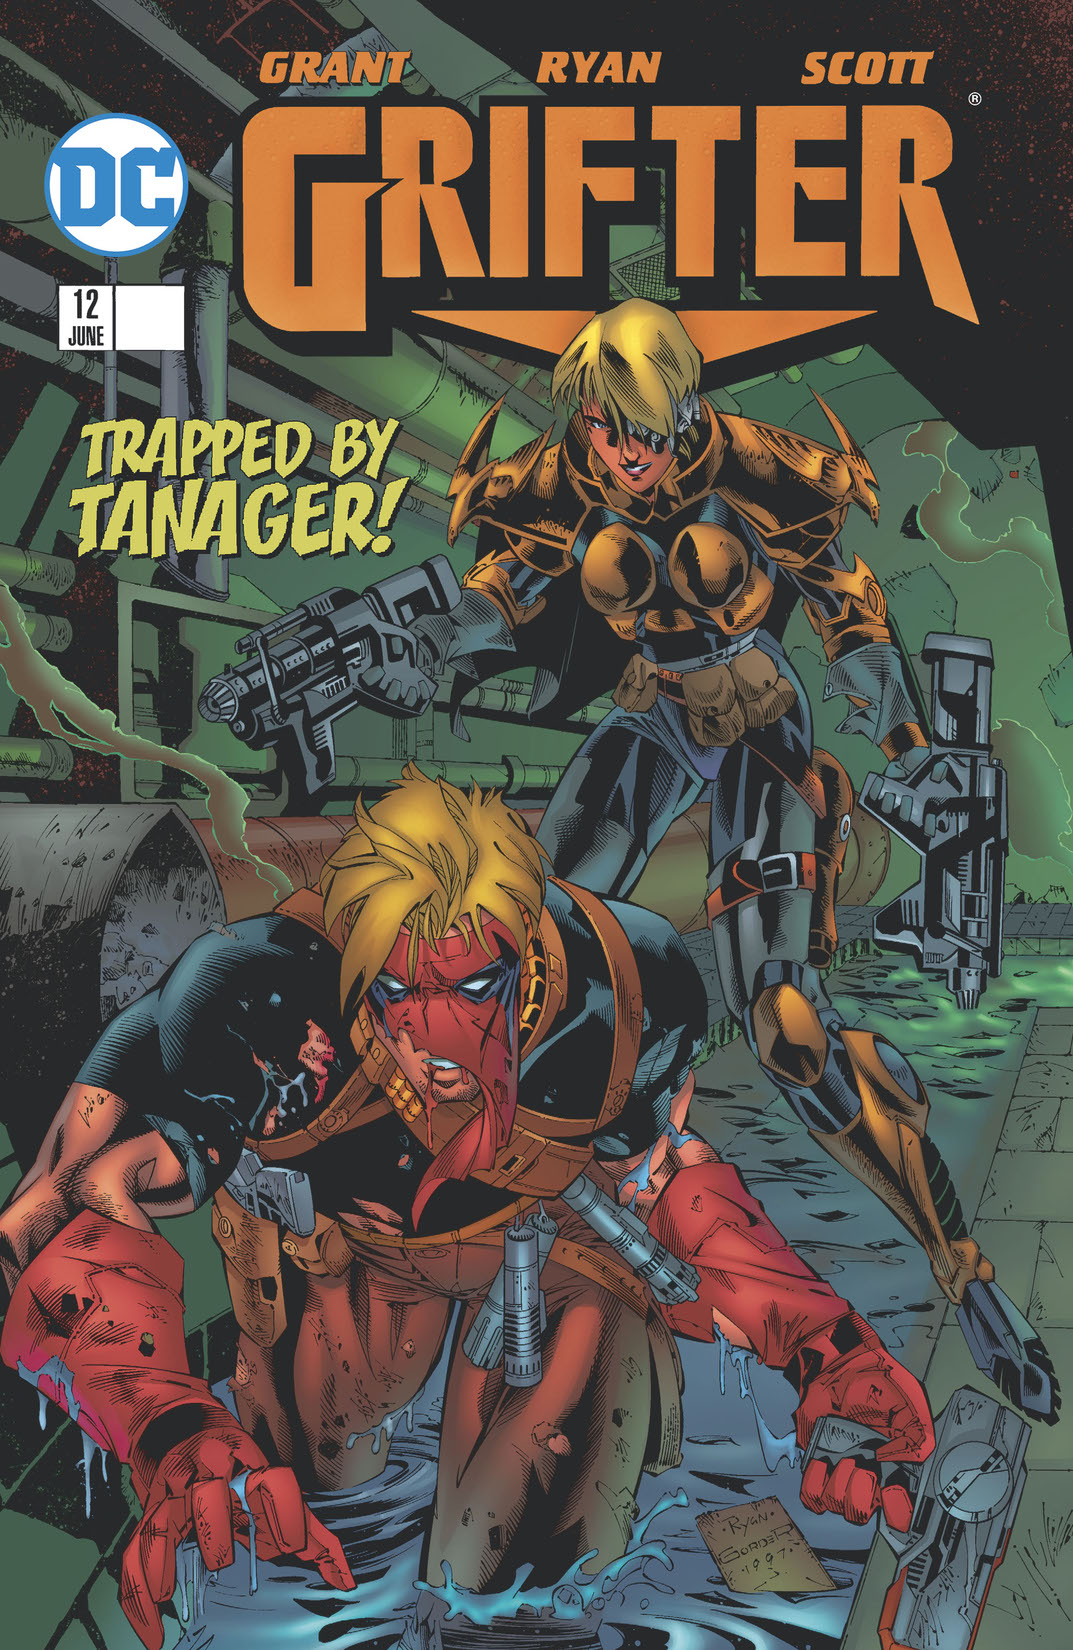 Grifter (1996-1997) #12 preview images